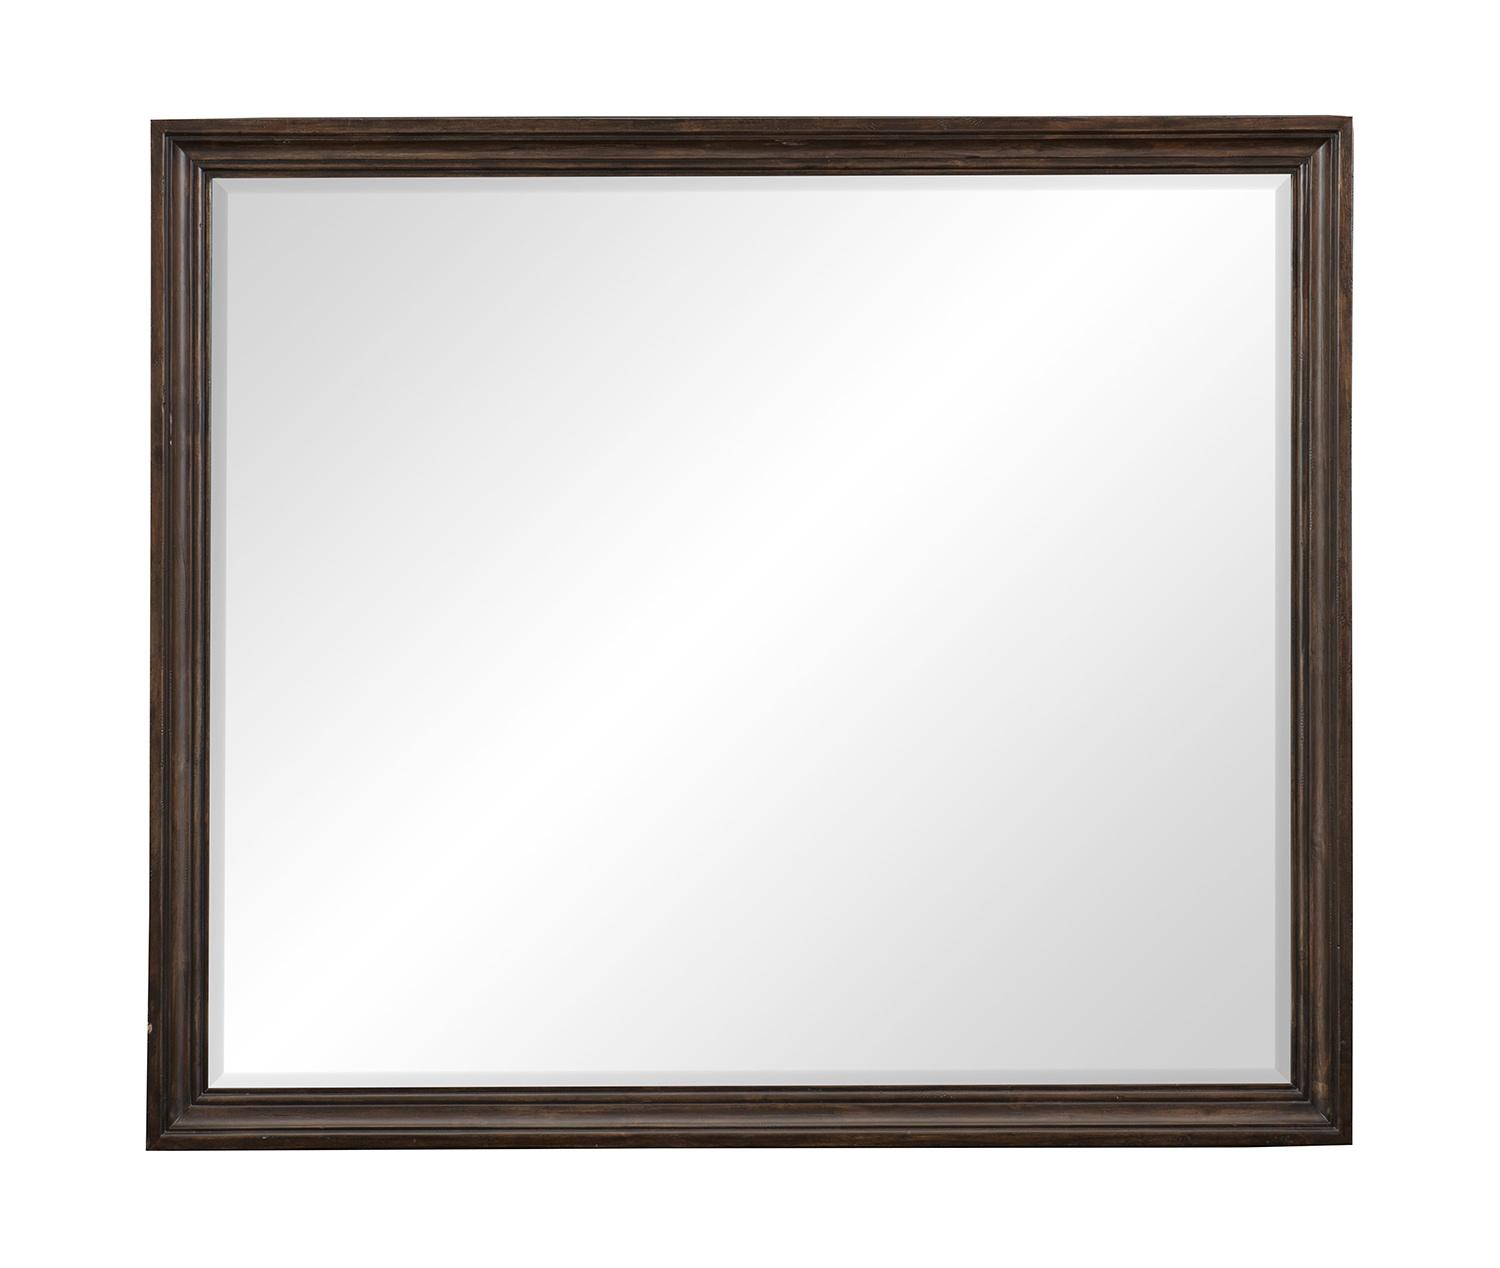 Homelegance Cardano Mirror - Driftwood Charcoal over Acacia Solids and Veneers